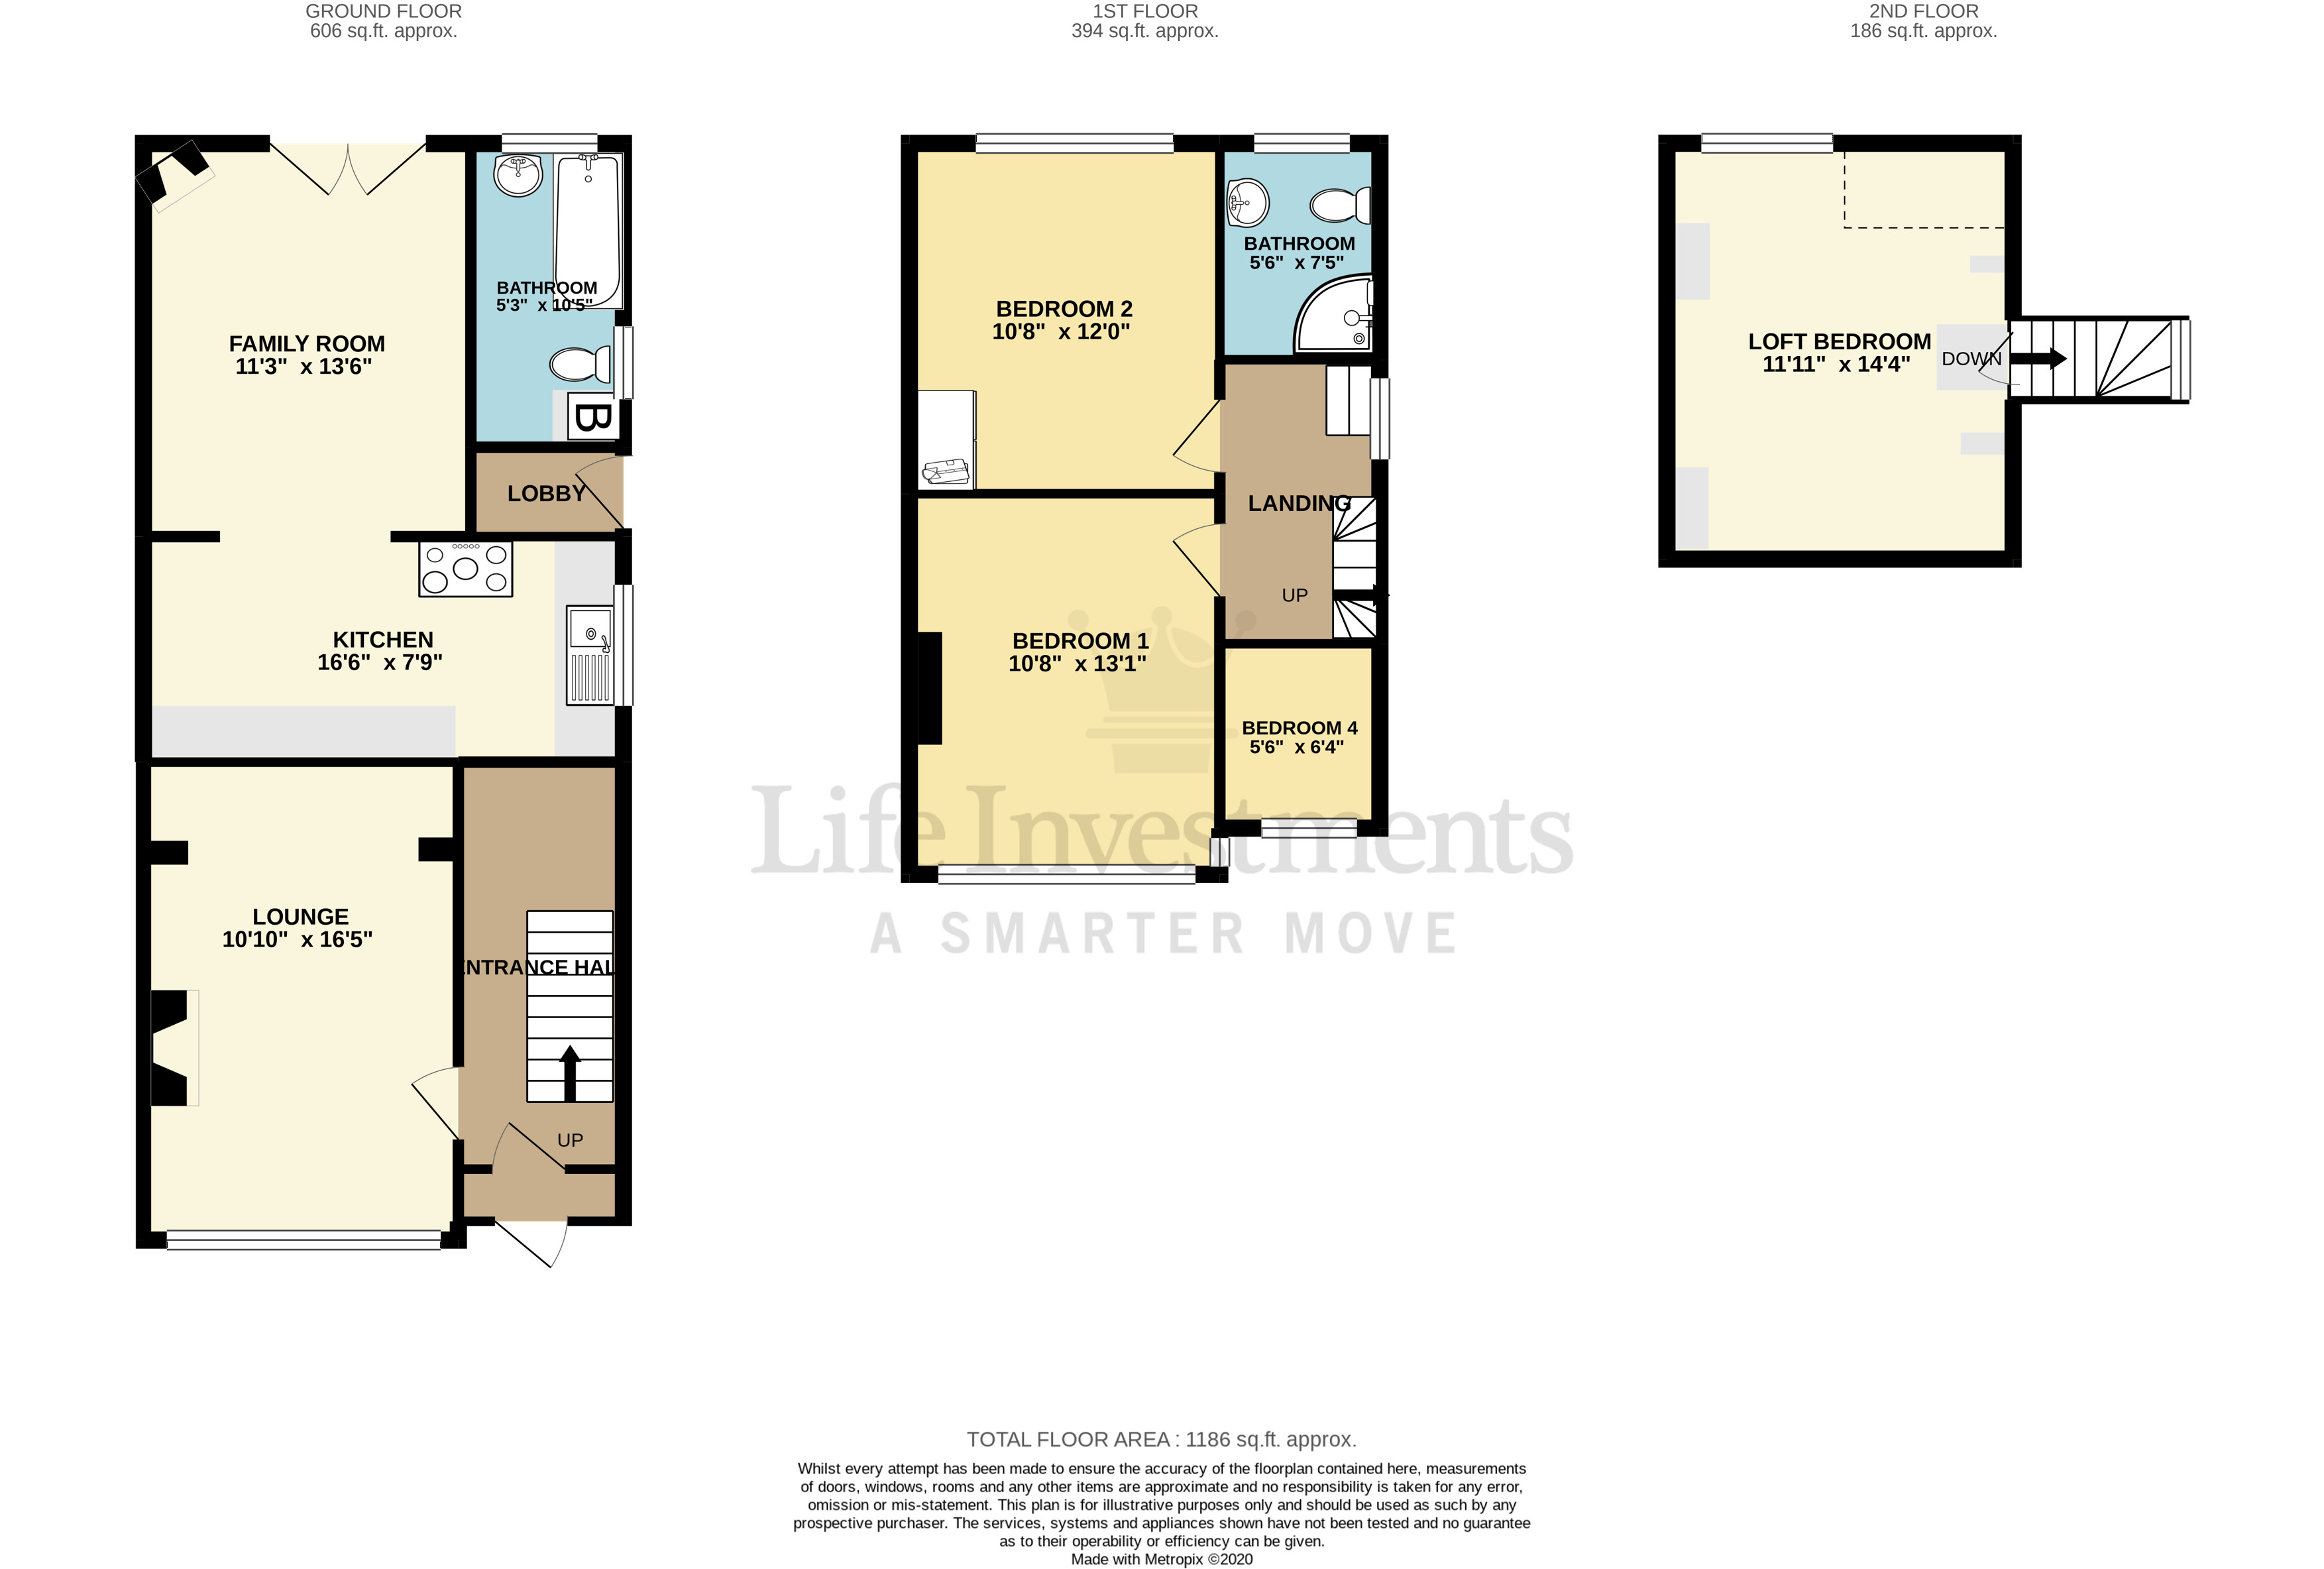 Floorplans For The Kent, Rugby